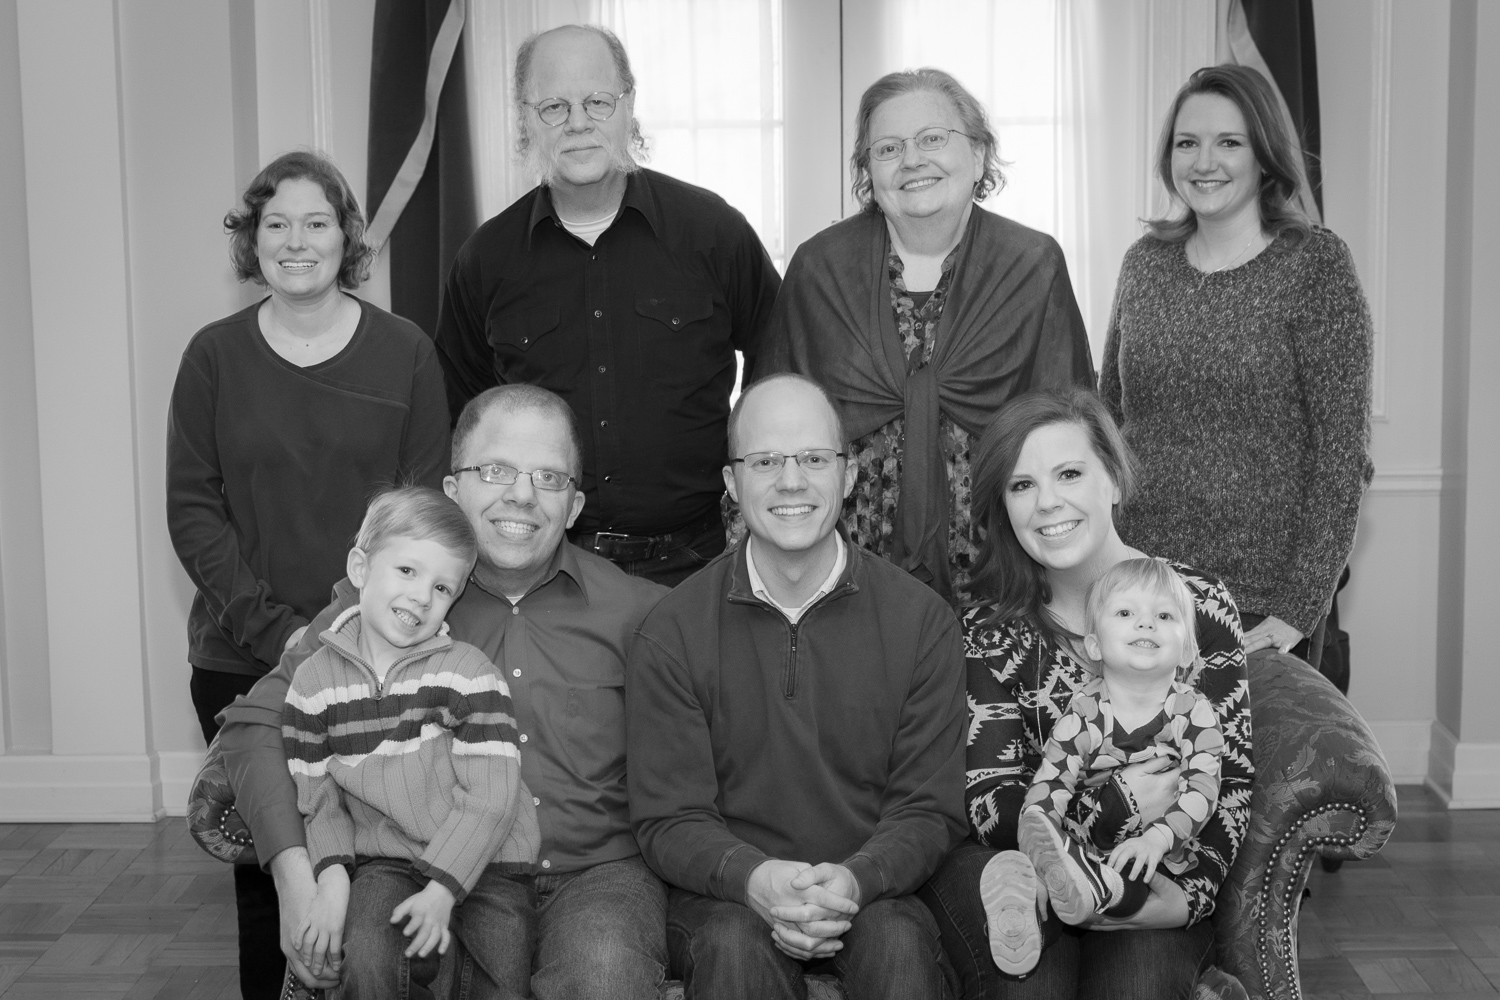 Black and white family photos. Grandparents, their children, and two grandchildren sitting on a sofa in a formal setting.